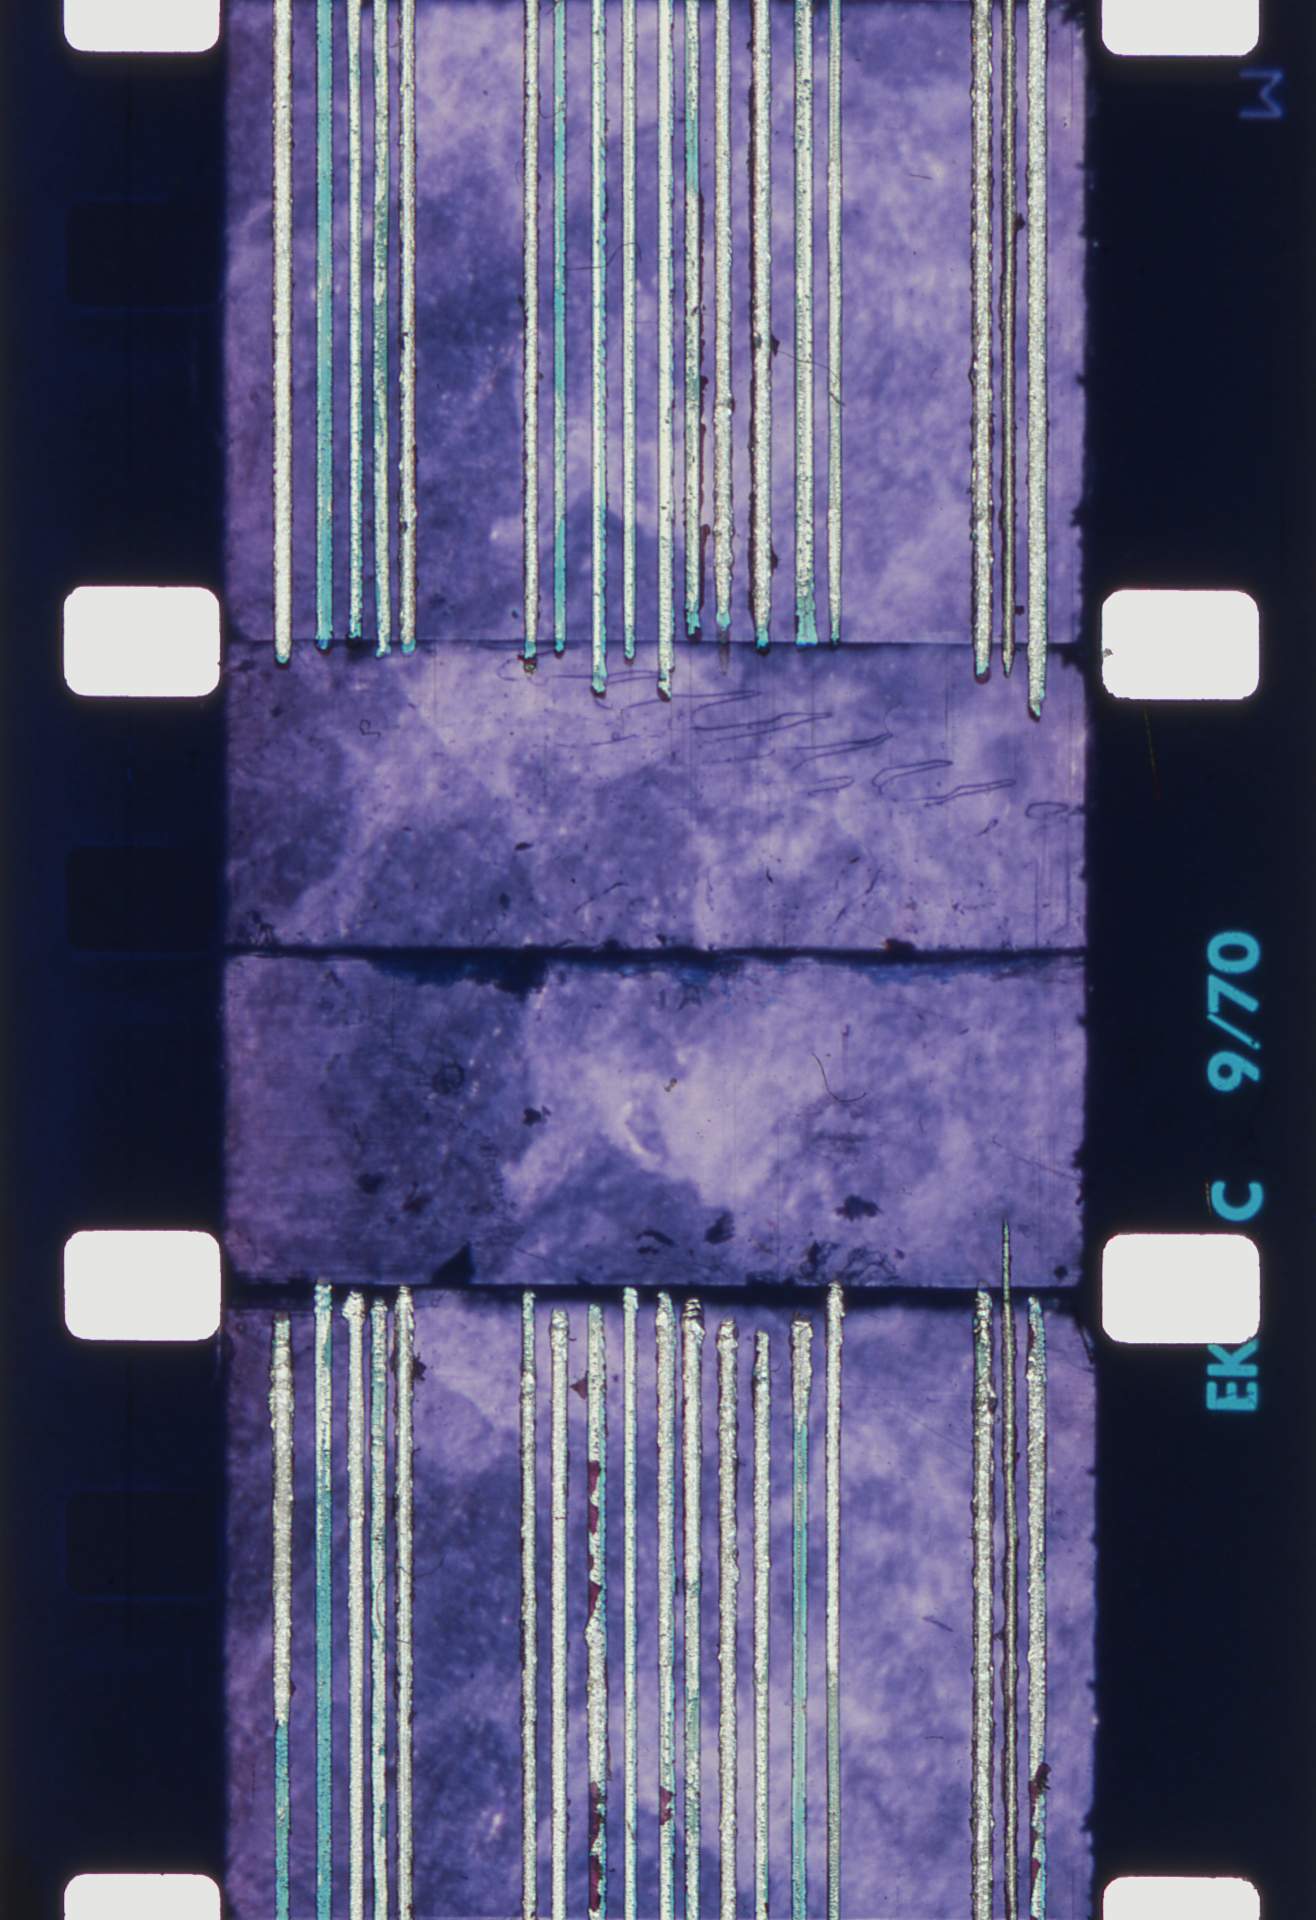 Film Fragment from S:TREAM:S:S:SECTION:S:SECTION:SS:ECTIONED